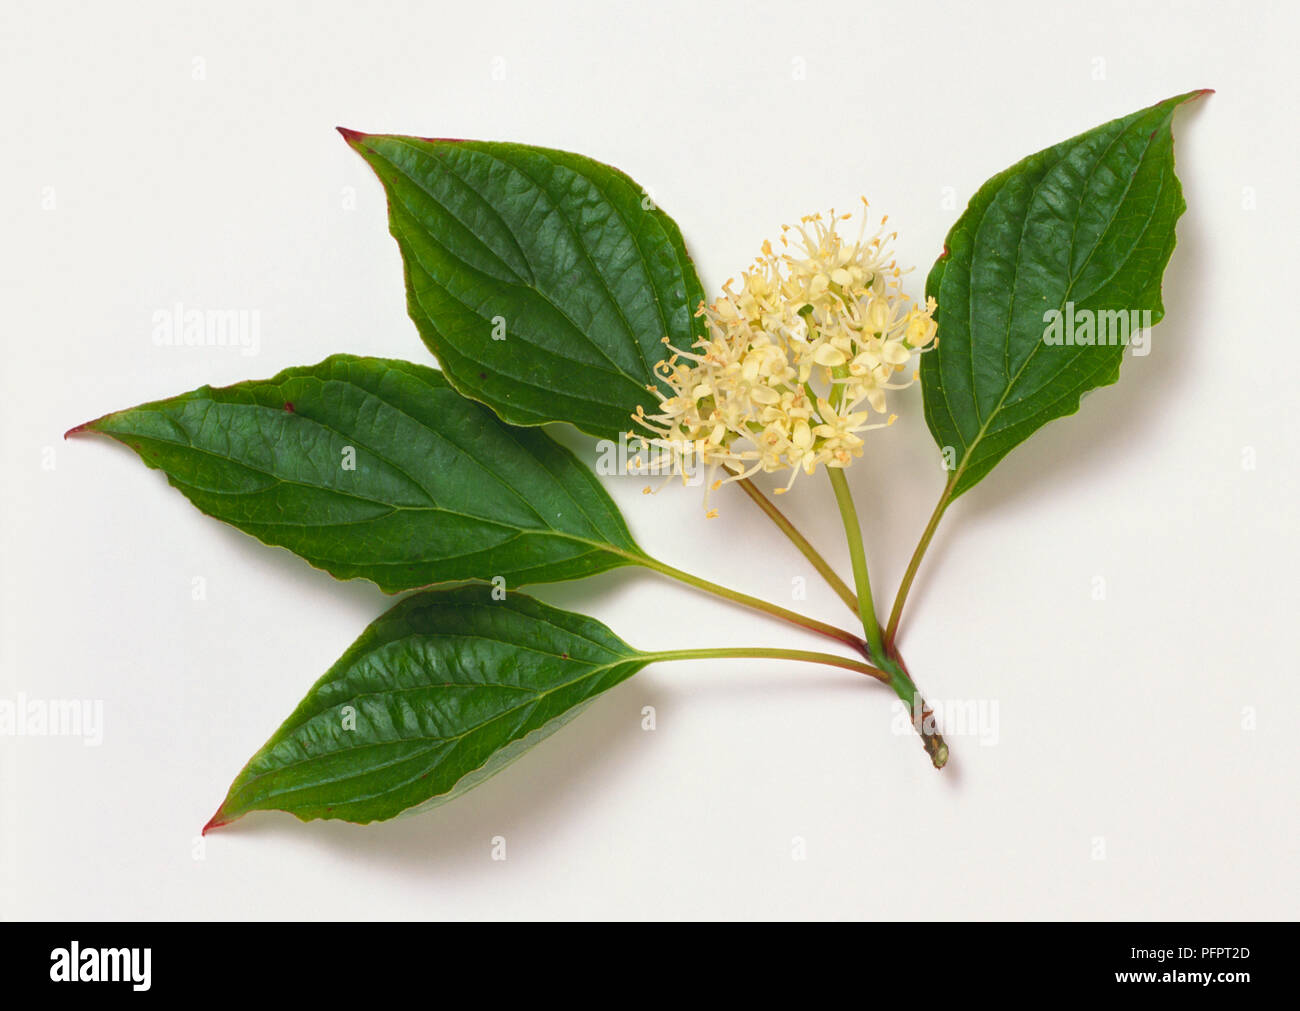 Cornaceae, Cornus alternifolia, long, elliptic, bright green leaves with smooth margins, and creamy flowers in flattened heads with protruding stamens. Stock Photo